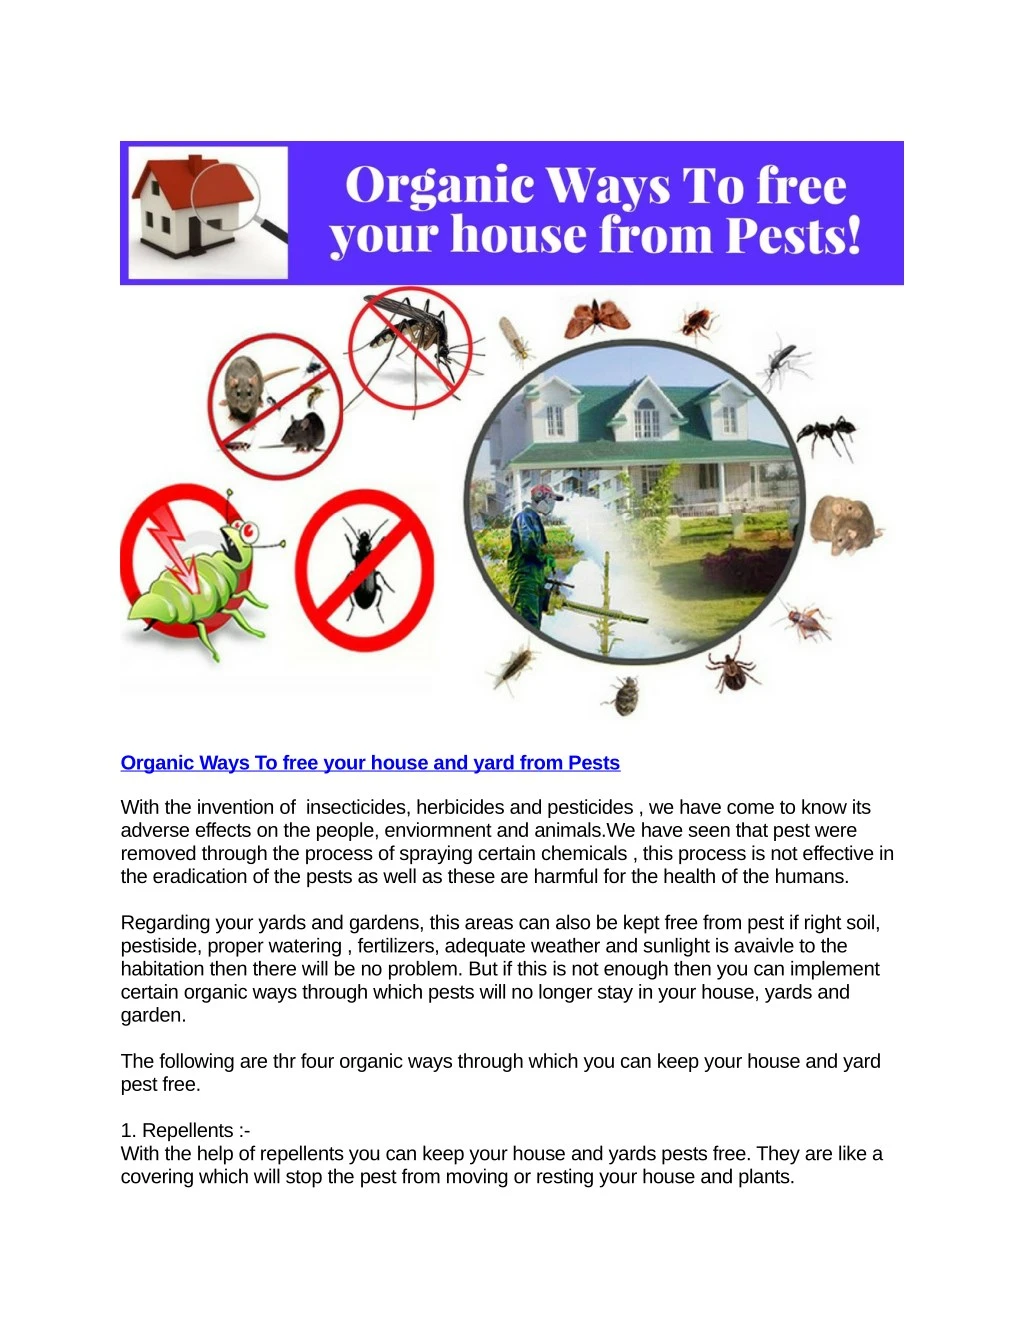 organic ways to free your house and yard from